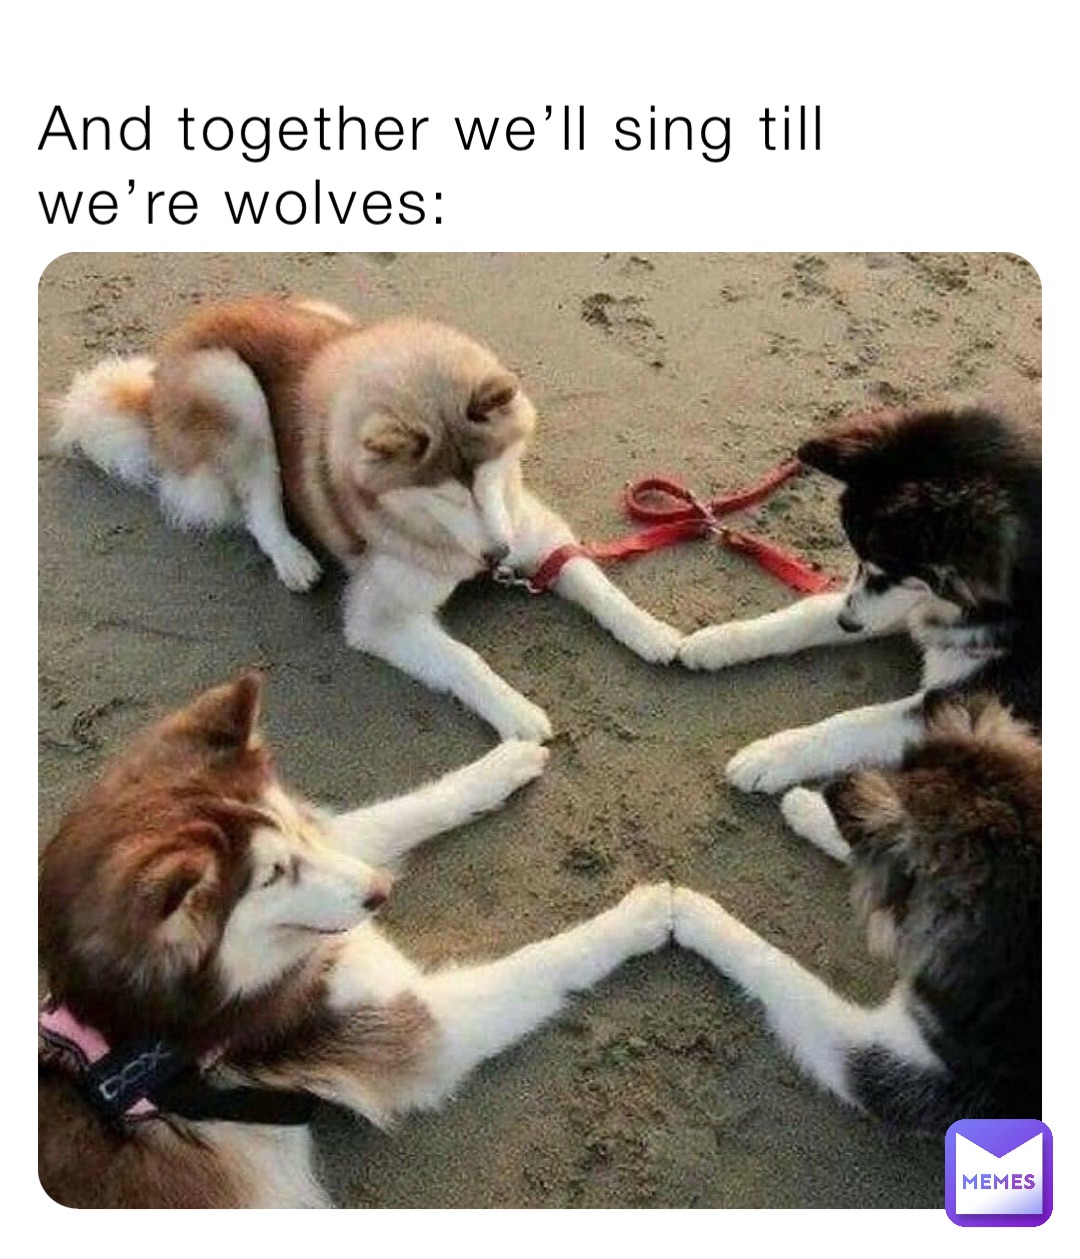 And together we’ll sing till we’re wolves: